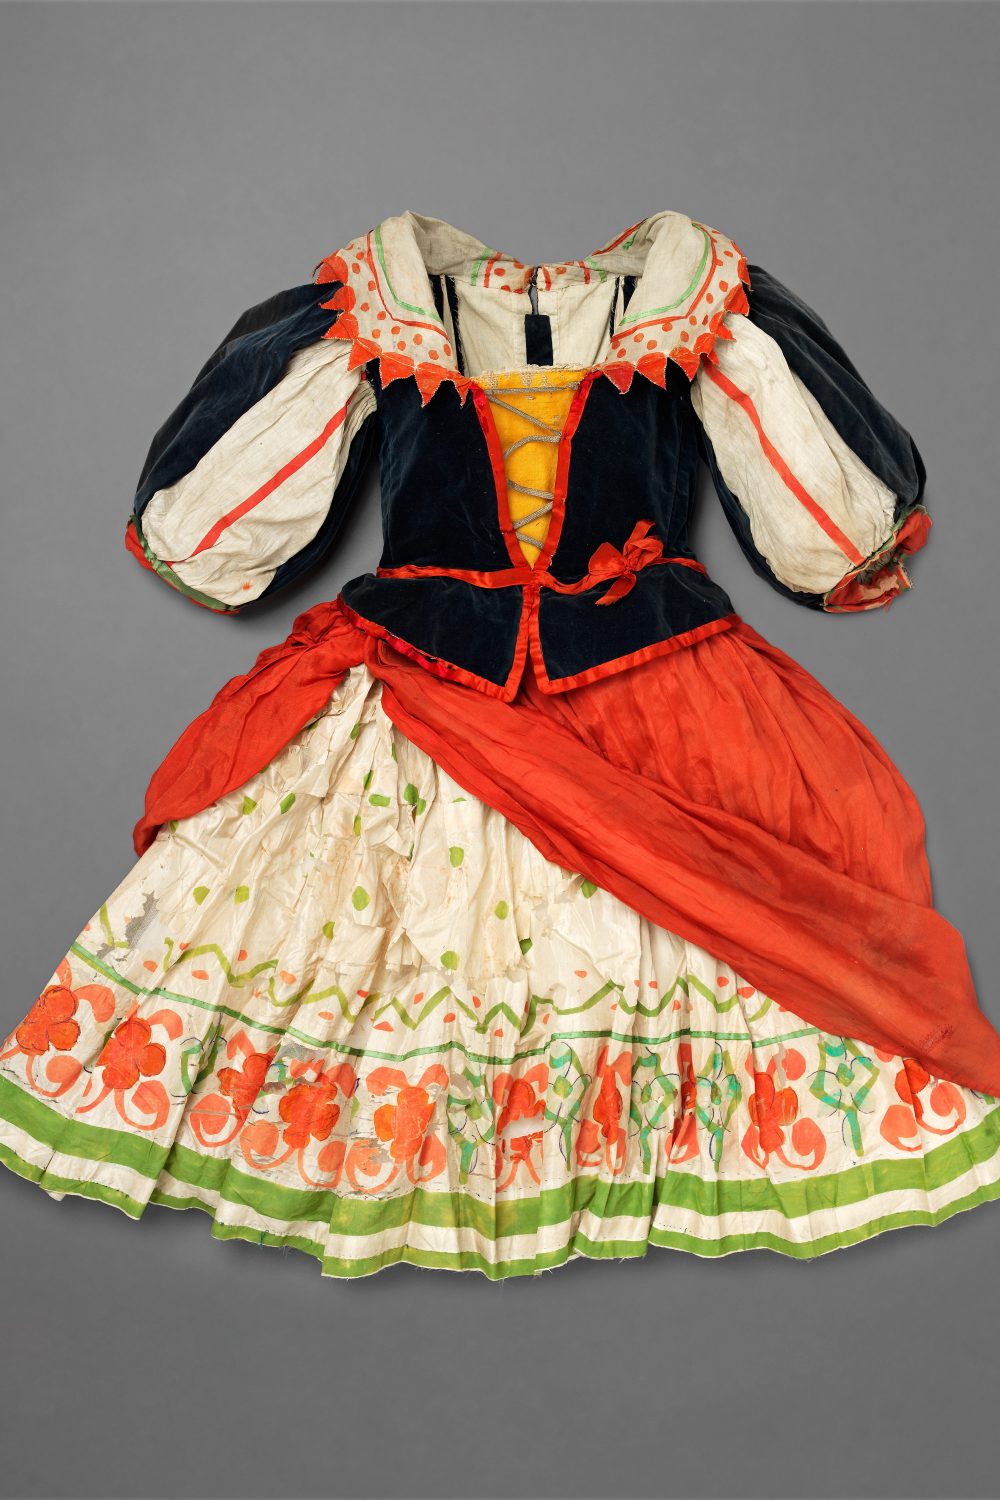 Ballets Russes Costume